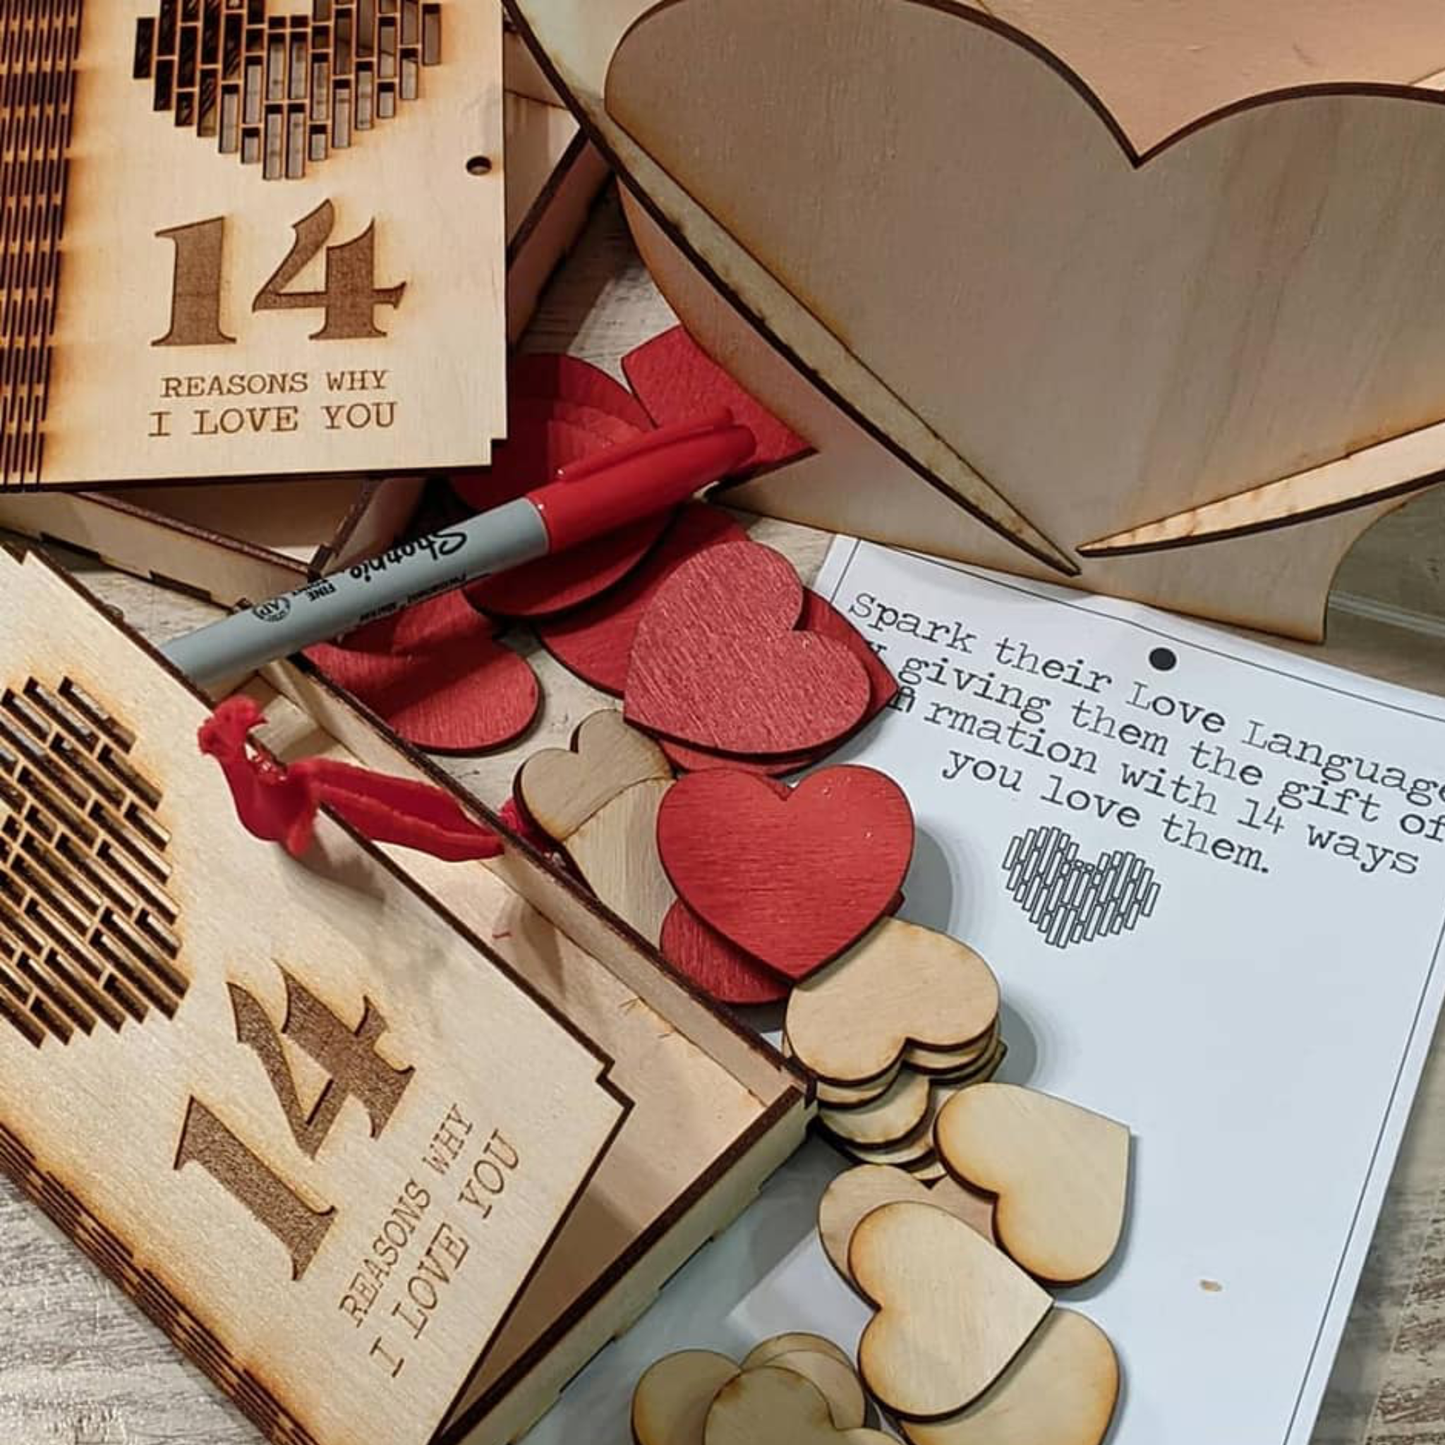 14 Reasons Why I Love You Wooden Book